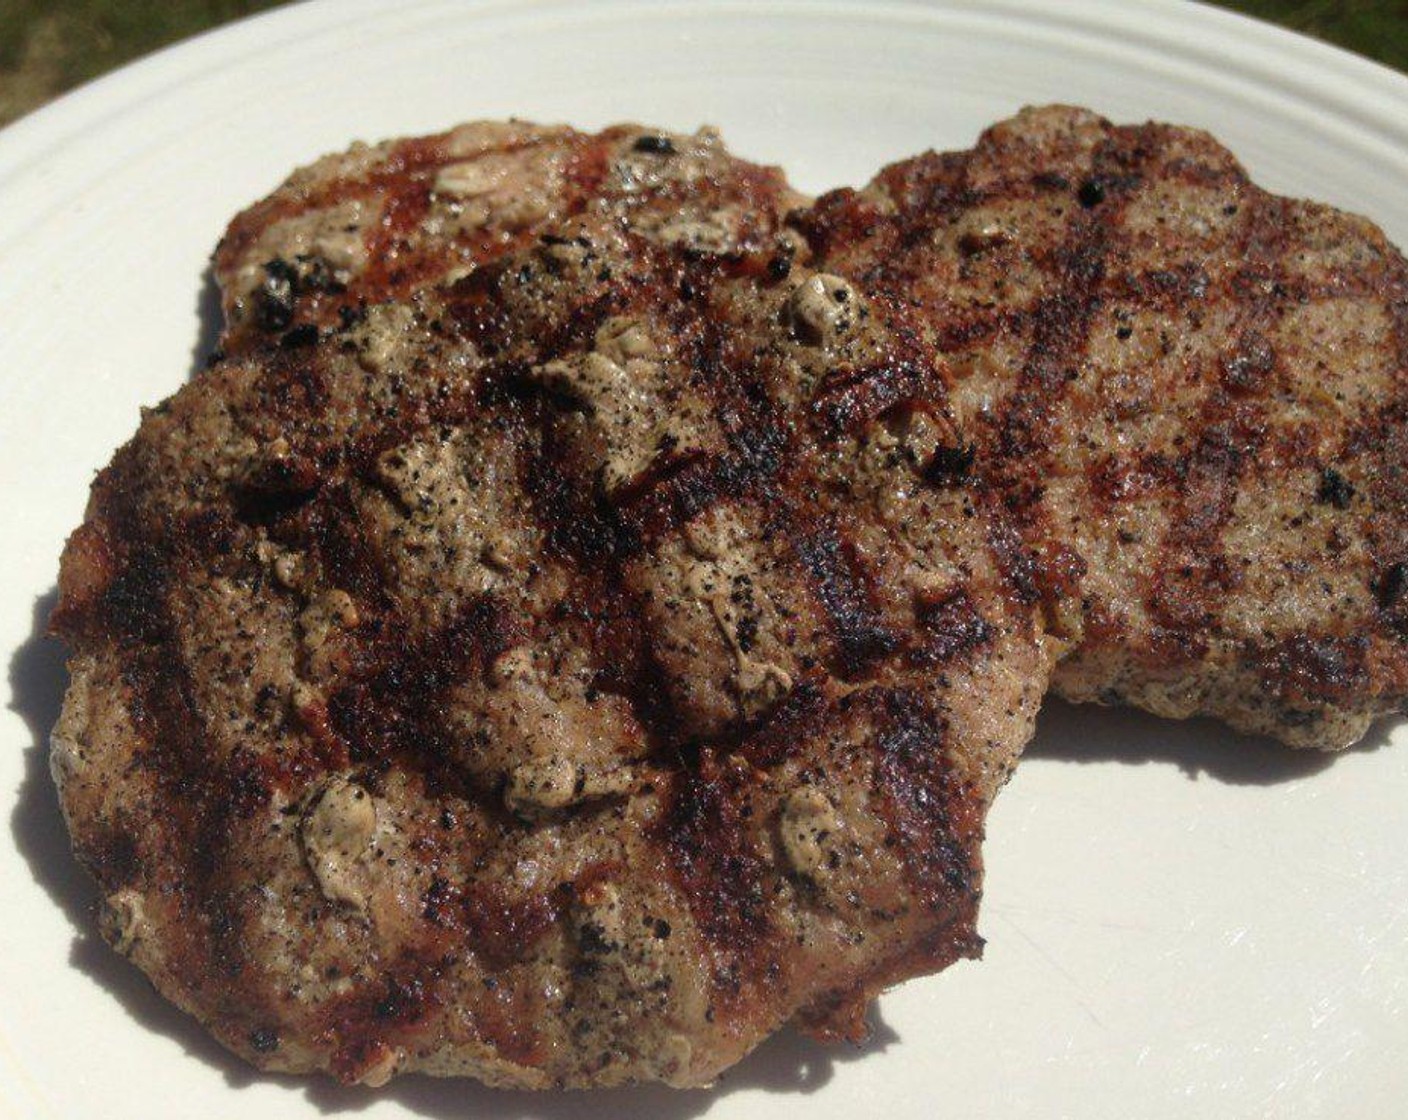 step 3 This method for grilling burgers gives you the most even cook and the best presentation. If you are cooking larger, thicker burgers you might need to increase your cook time on each side.